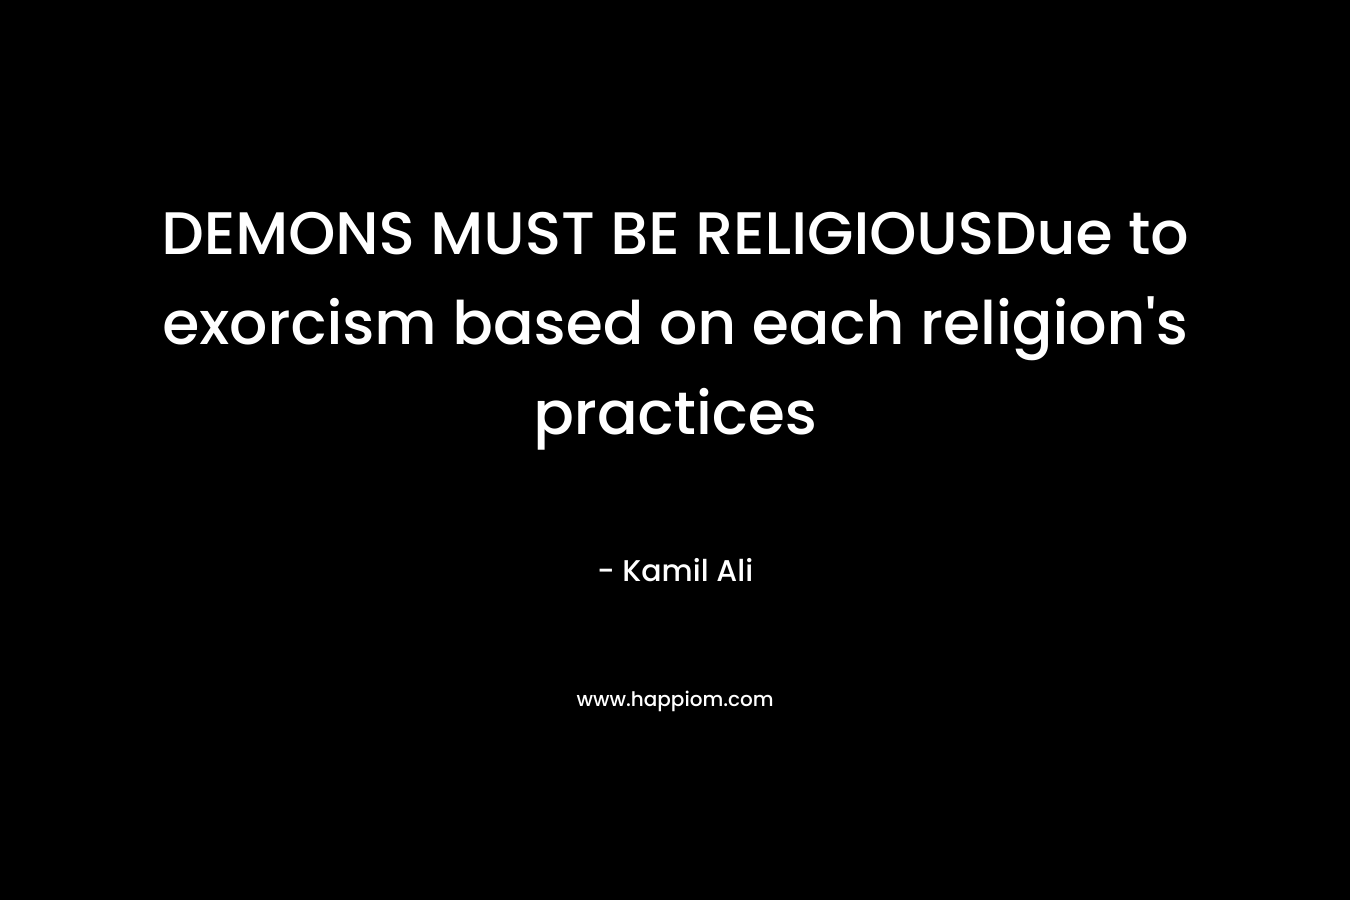 DEMONS MUST BE RELIGIOUSDue to exorcism based on each religion’s practices – Kamil Ali